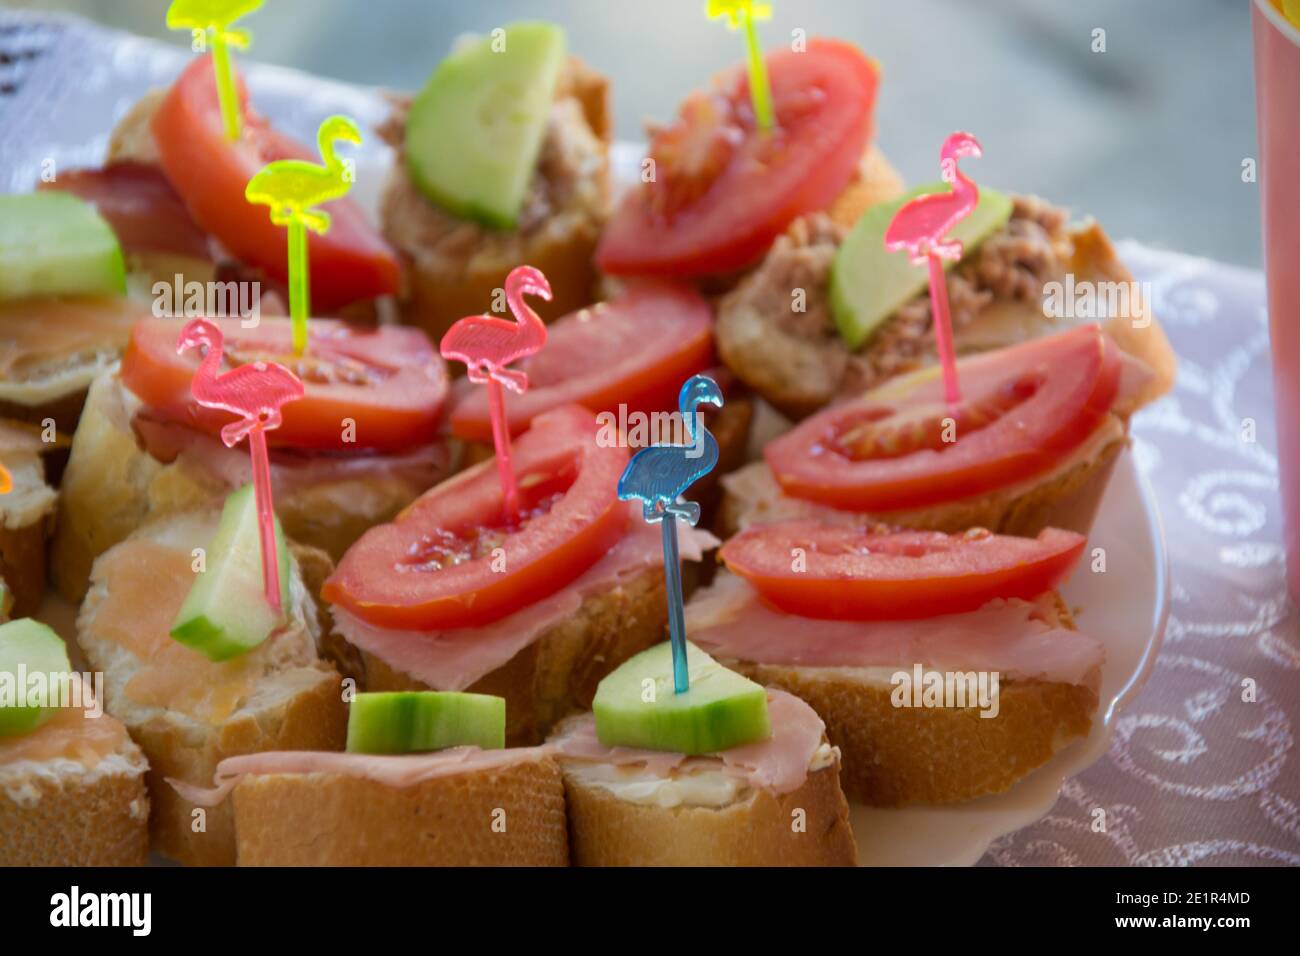 Healthy sandwiches with ham, tomato and cucumbers on a plate, decorated with plastic sticks with colorful flamingos, party concepts, appetizers for ce Stock Photo